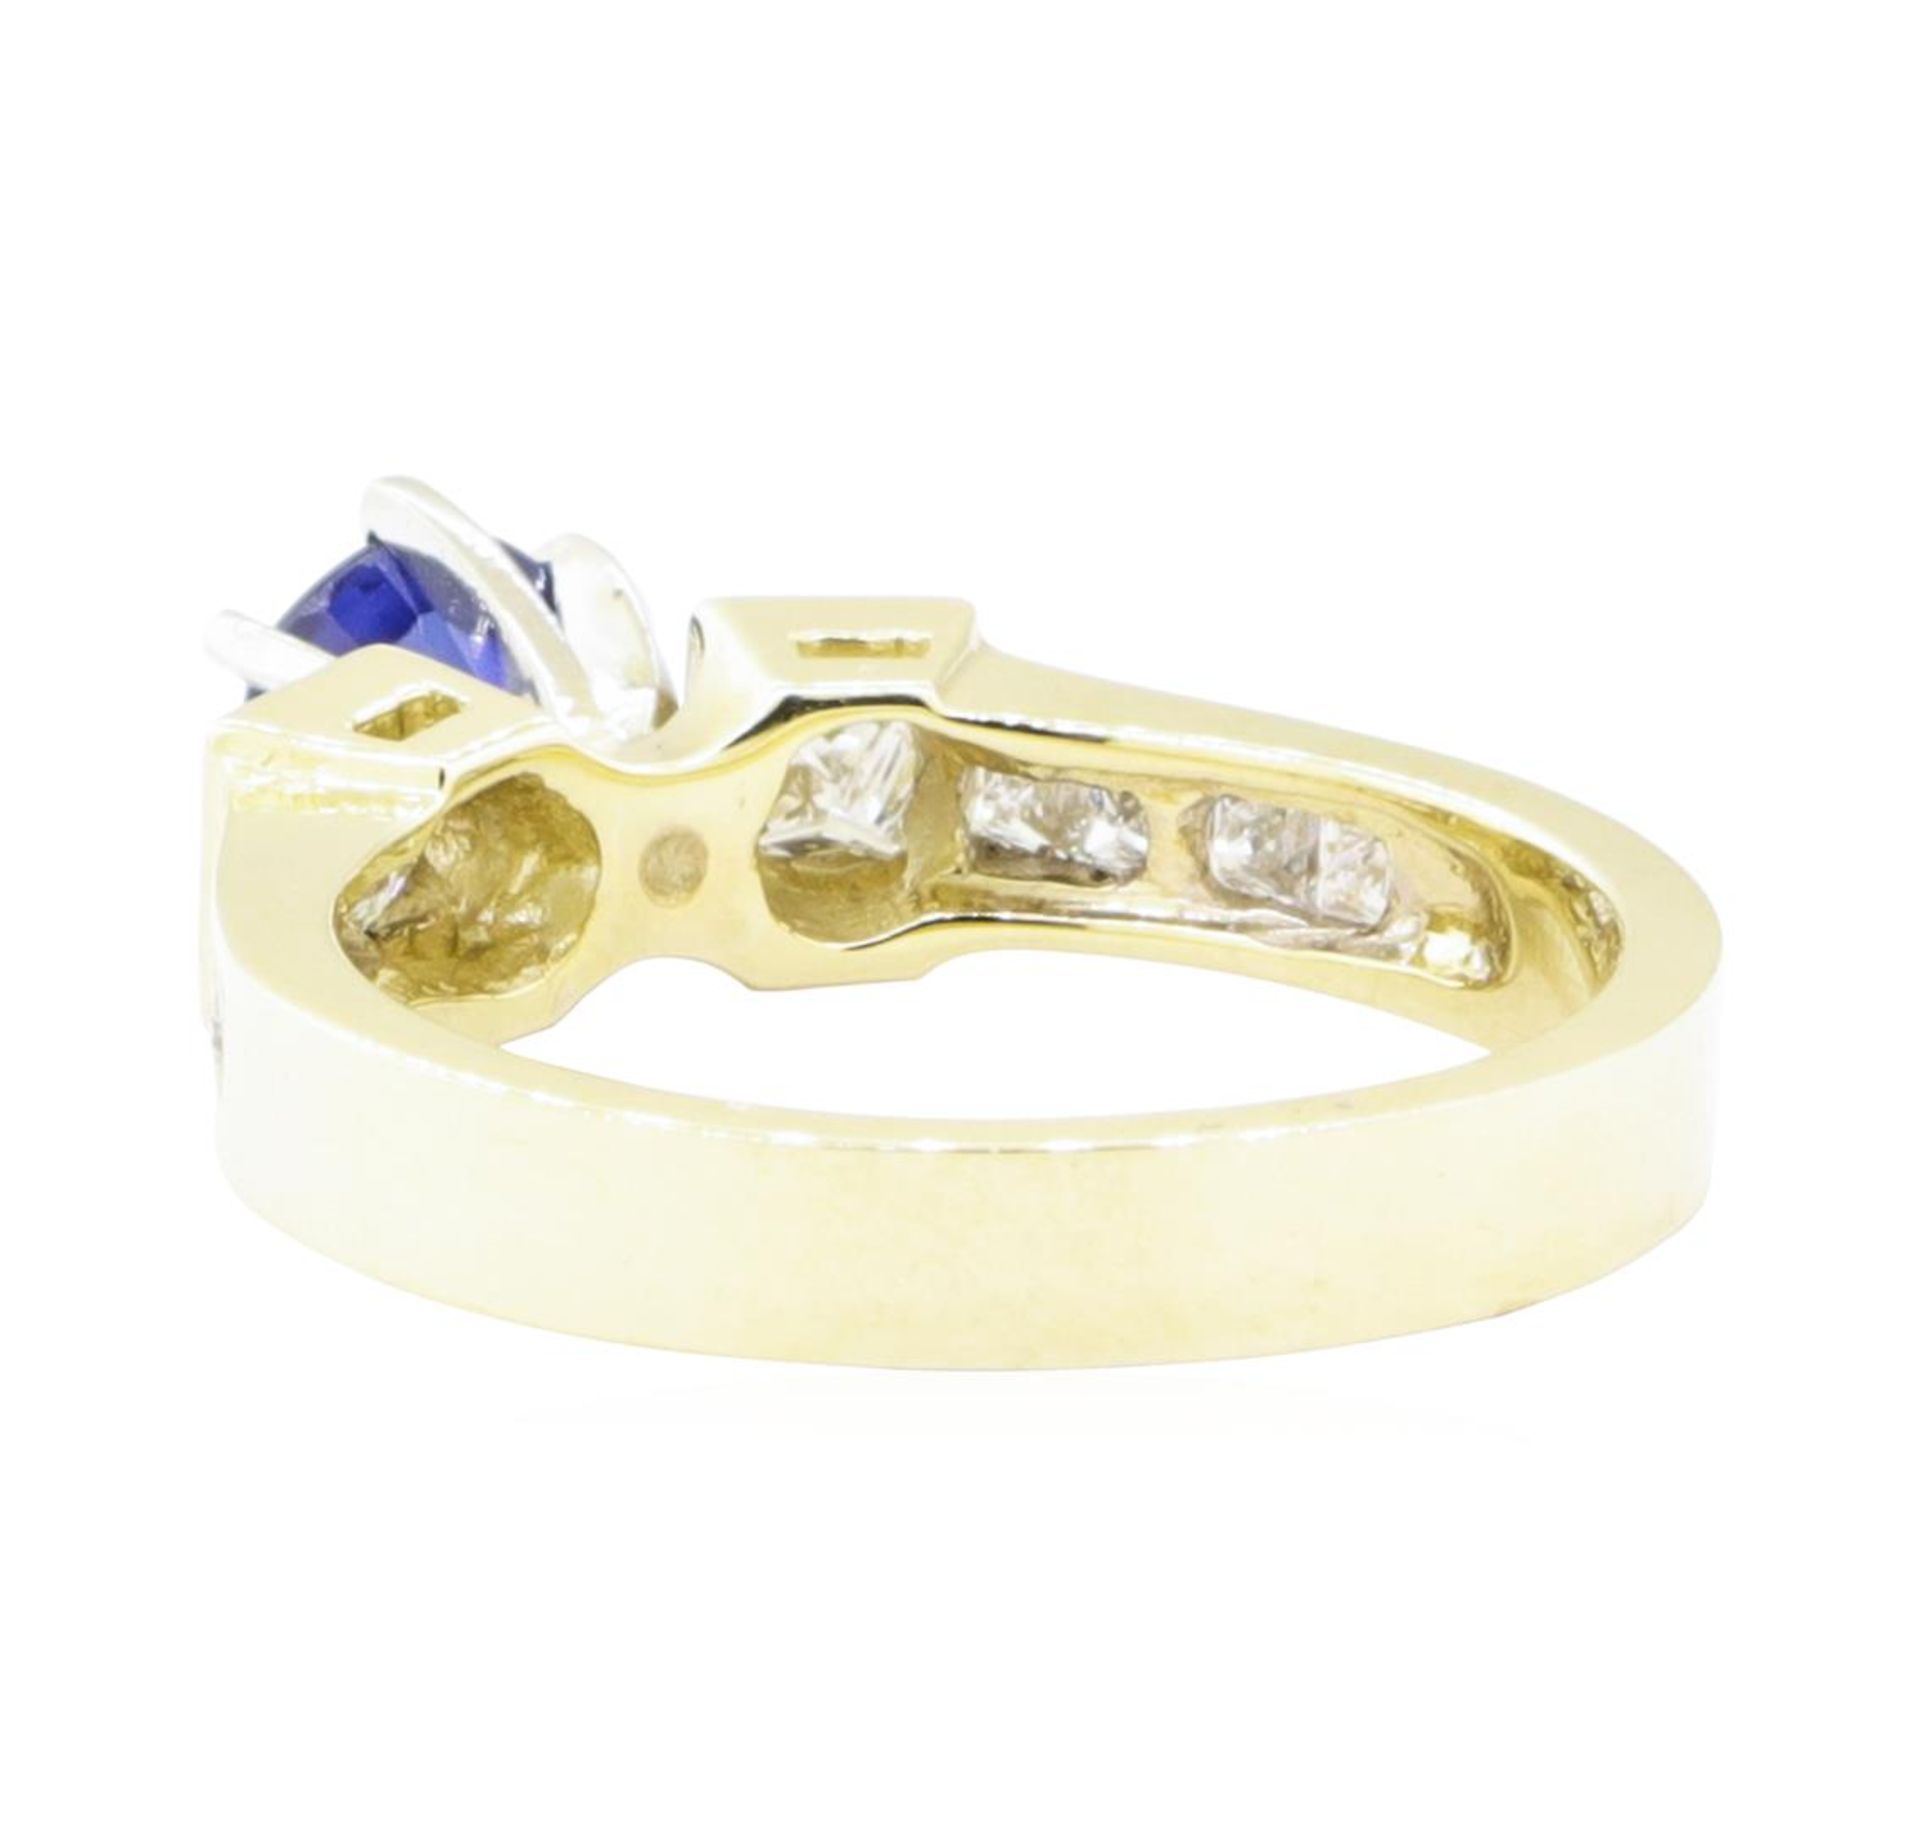 1.24 ctw Sapphire And Diamond Ring - 14KT Yellow Gold - Image 3 of 5